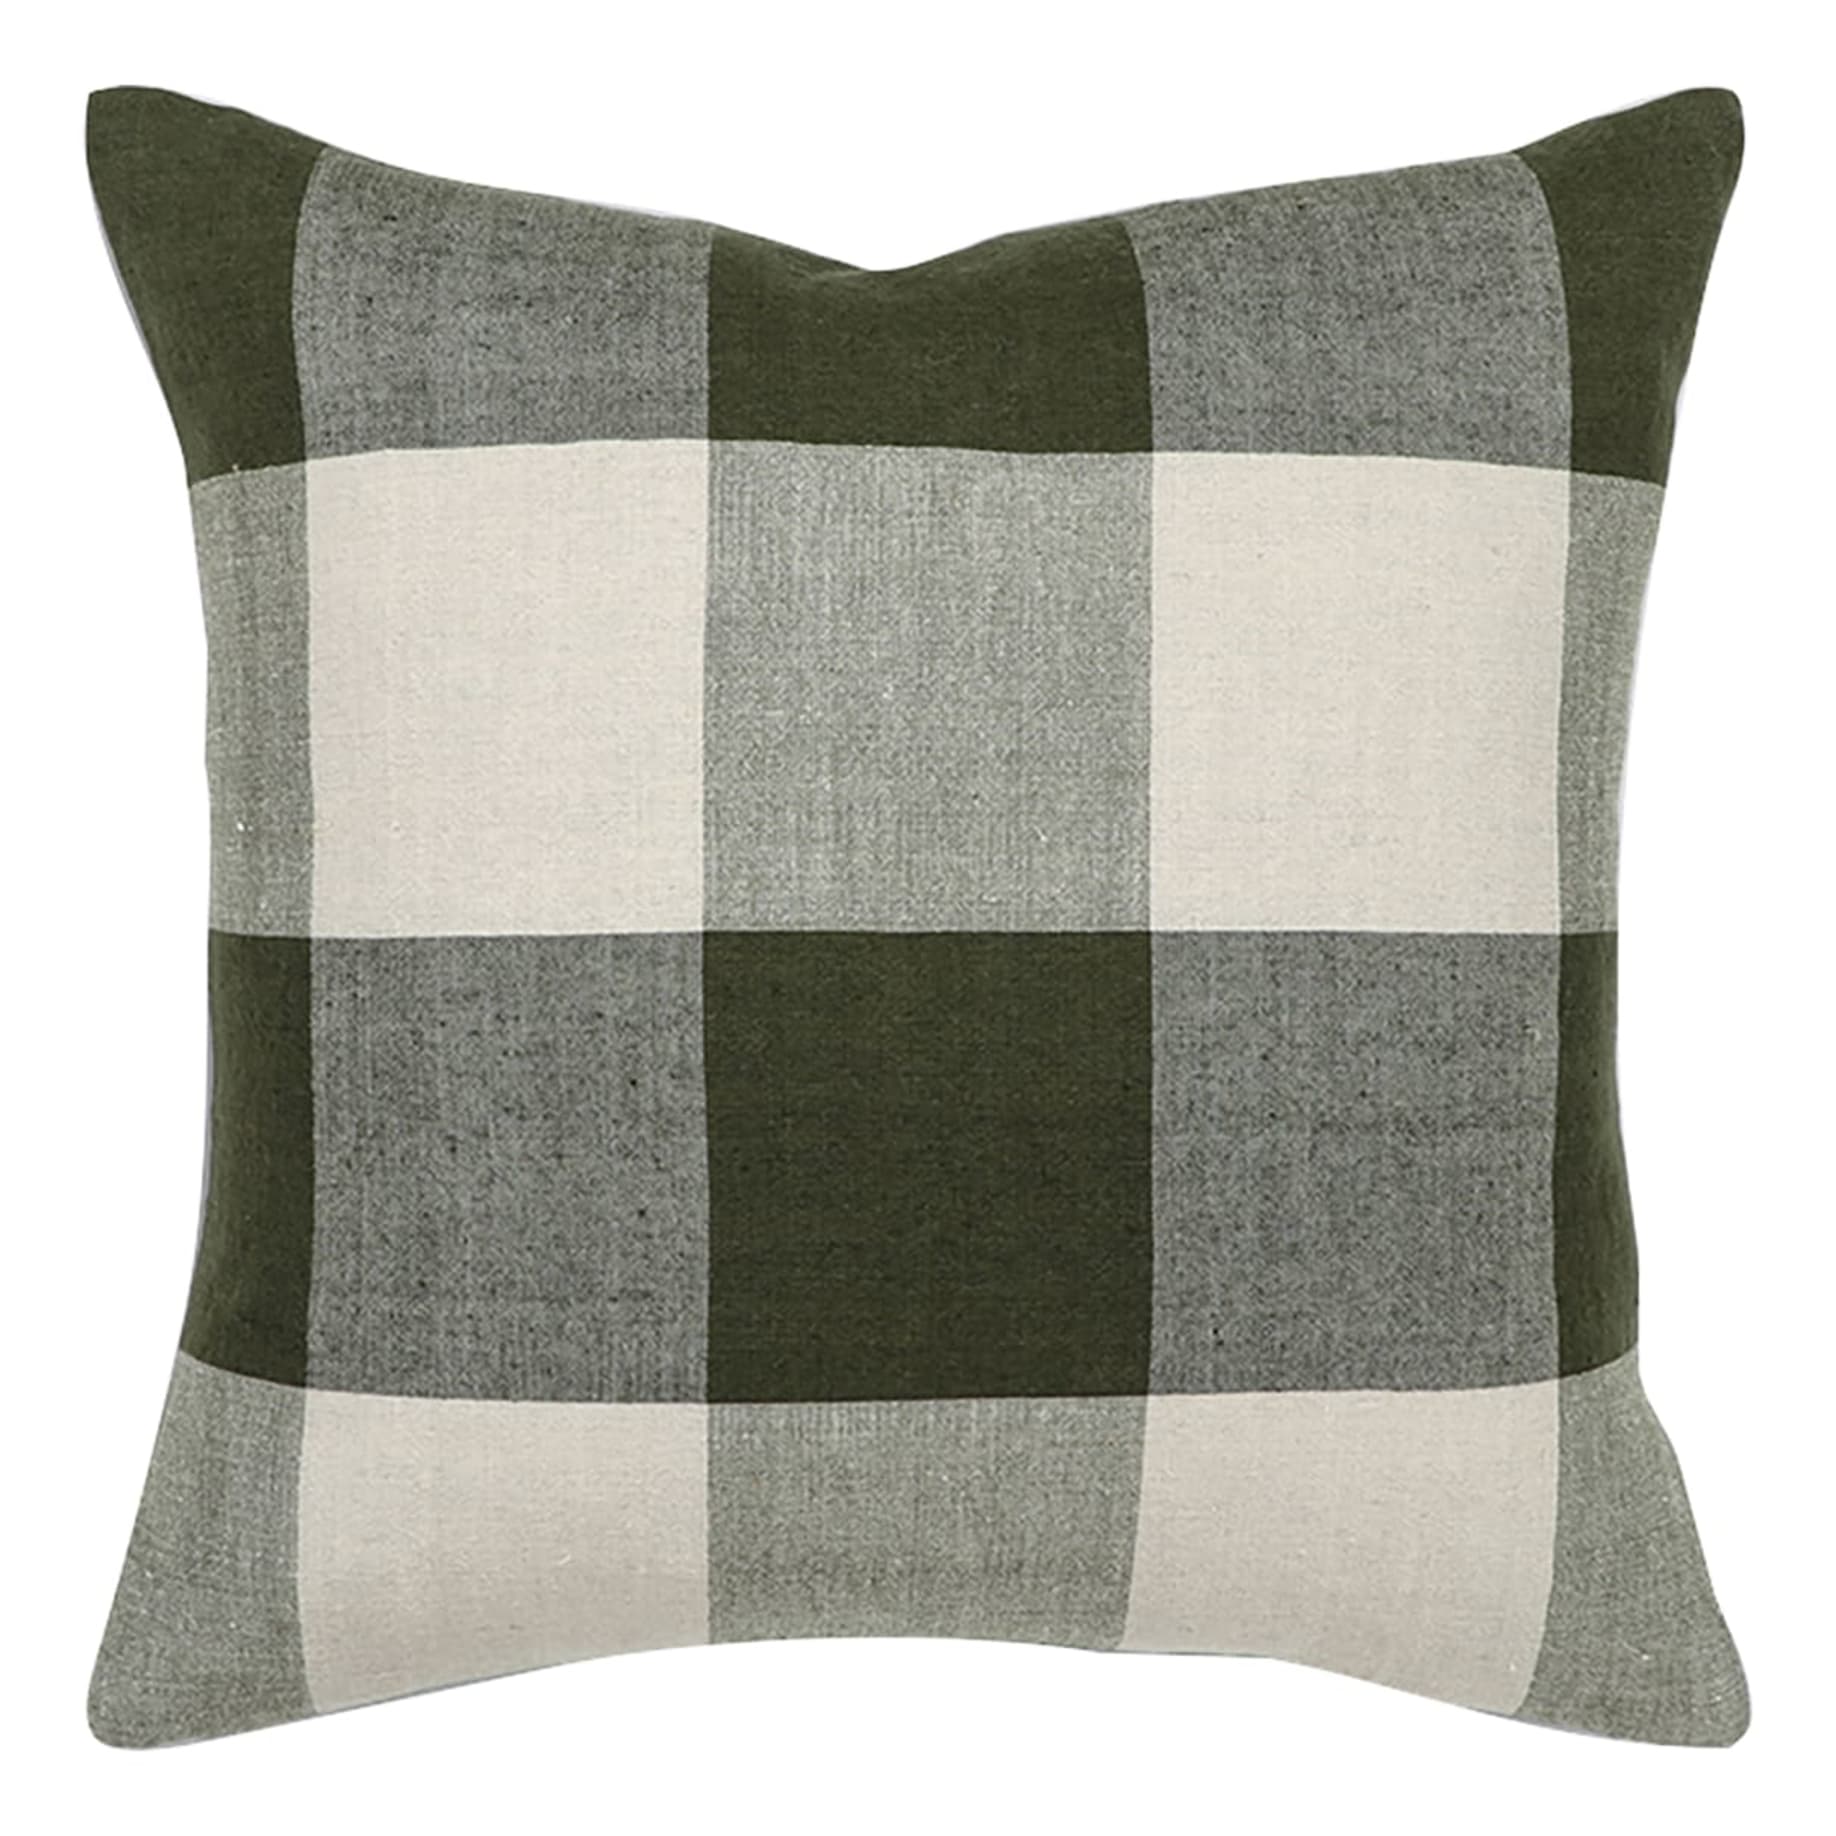 Archer Feather Fill Cushion 50x50cm in Olive